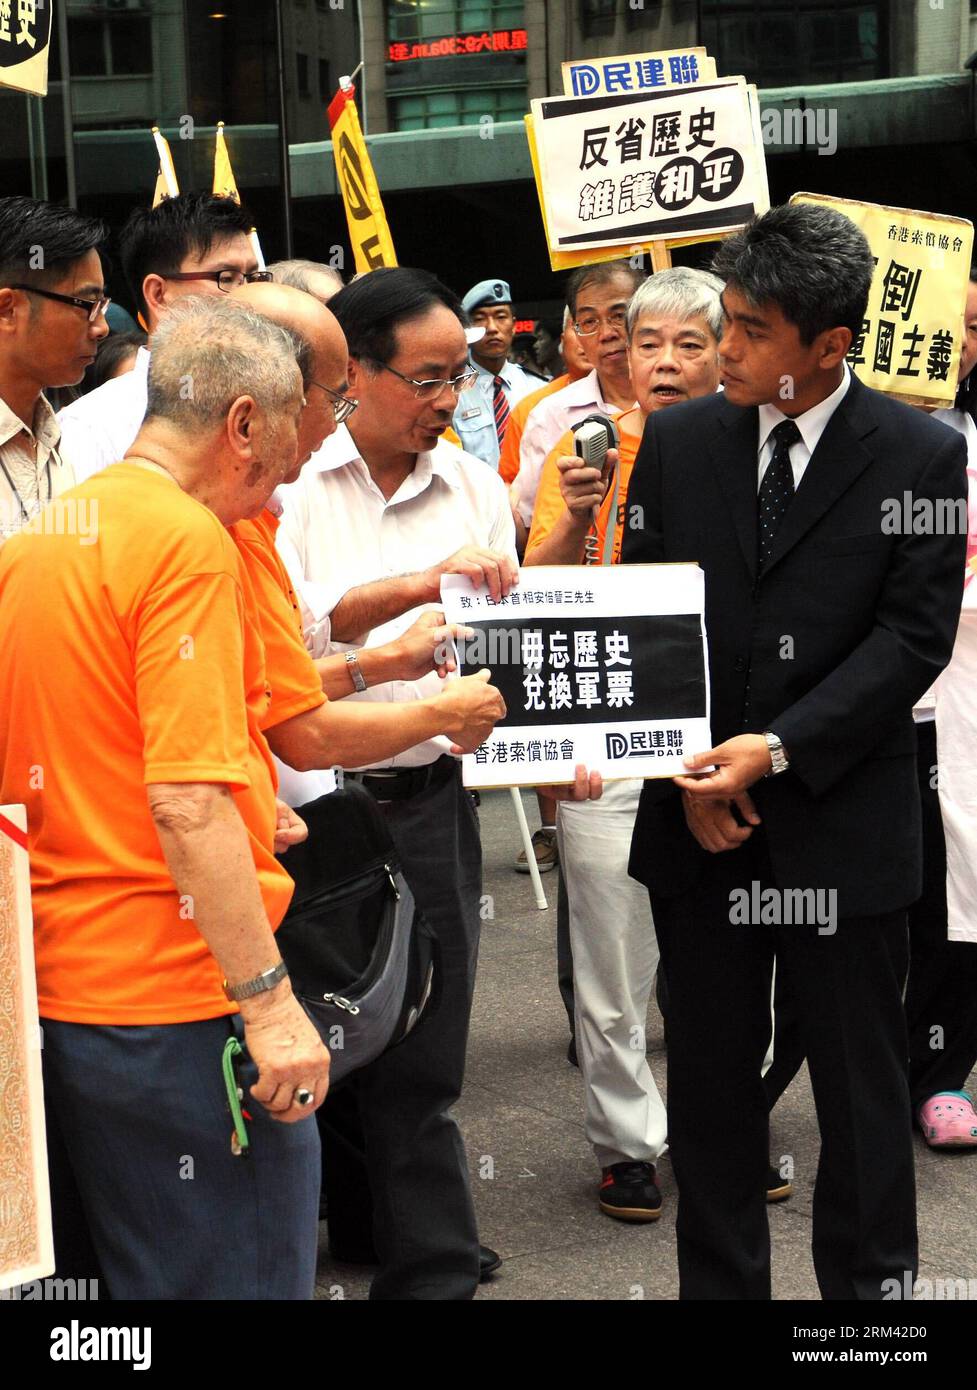 Bildnummer: 60360544  Datum: 15.08.2013  Copyright: imago/Xinhua (130815) -- HONG KONG, Aug. 15, 2013 (Xinhua) -- Members of a social group hand in a letter of protest to a representative of the Japanese Consulate General in south China s Hong Kong, Aug. 15, 2013. Thursday marks the 68th anniversary of Japan s surrender to the Allies and China s victory on Japan s aggression war in 1945. Local activists in Hong Hong organzied a parade to commemorate the historic event and protest against Japanese militarism in front of Japanese Consulate General here Thursday. (Xinhua/Wong Pun Keung)(wjq) CHIN Stock Photo